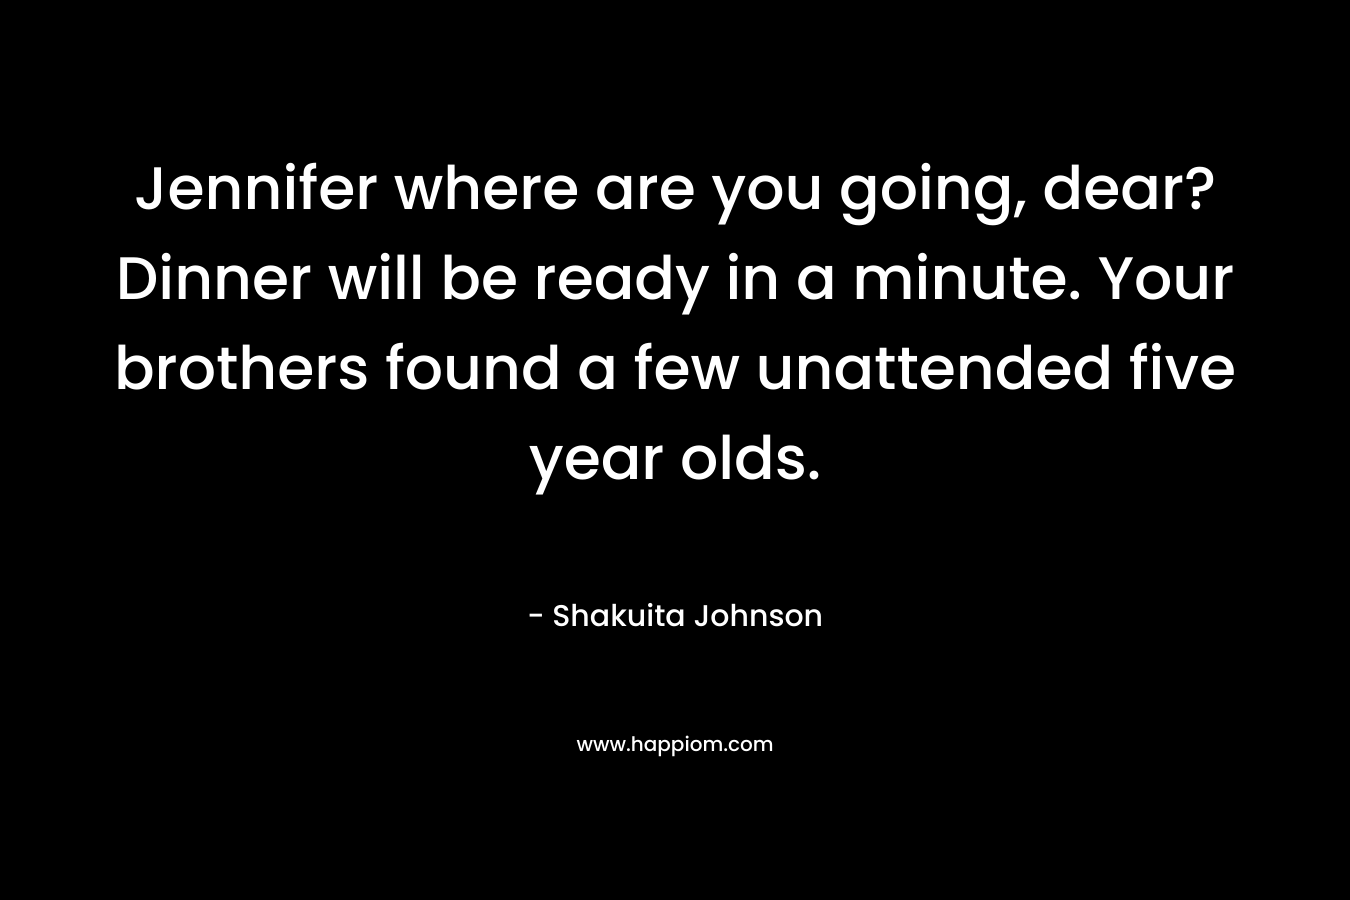 Jennifer where are you going, dear? Dinner will be ready in a minute. Your brothers found a few unattended five year olds. – Shakuita Johnson